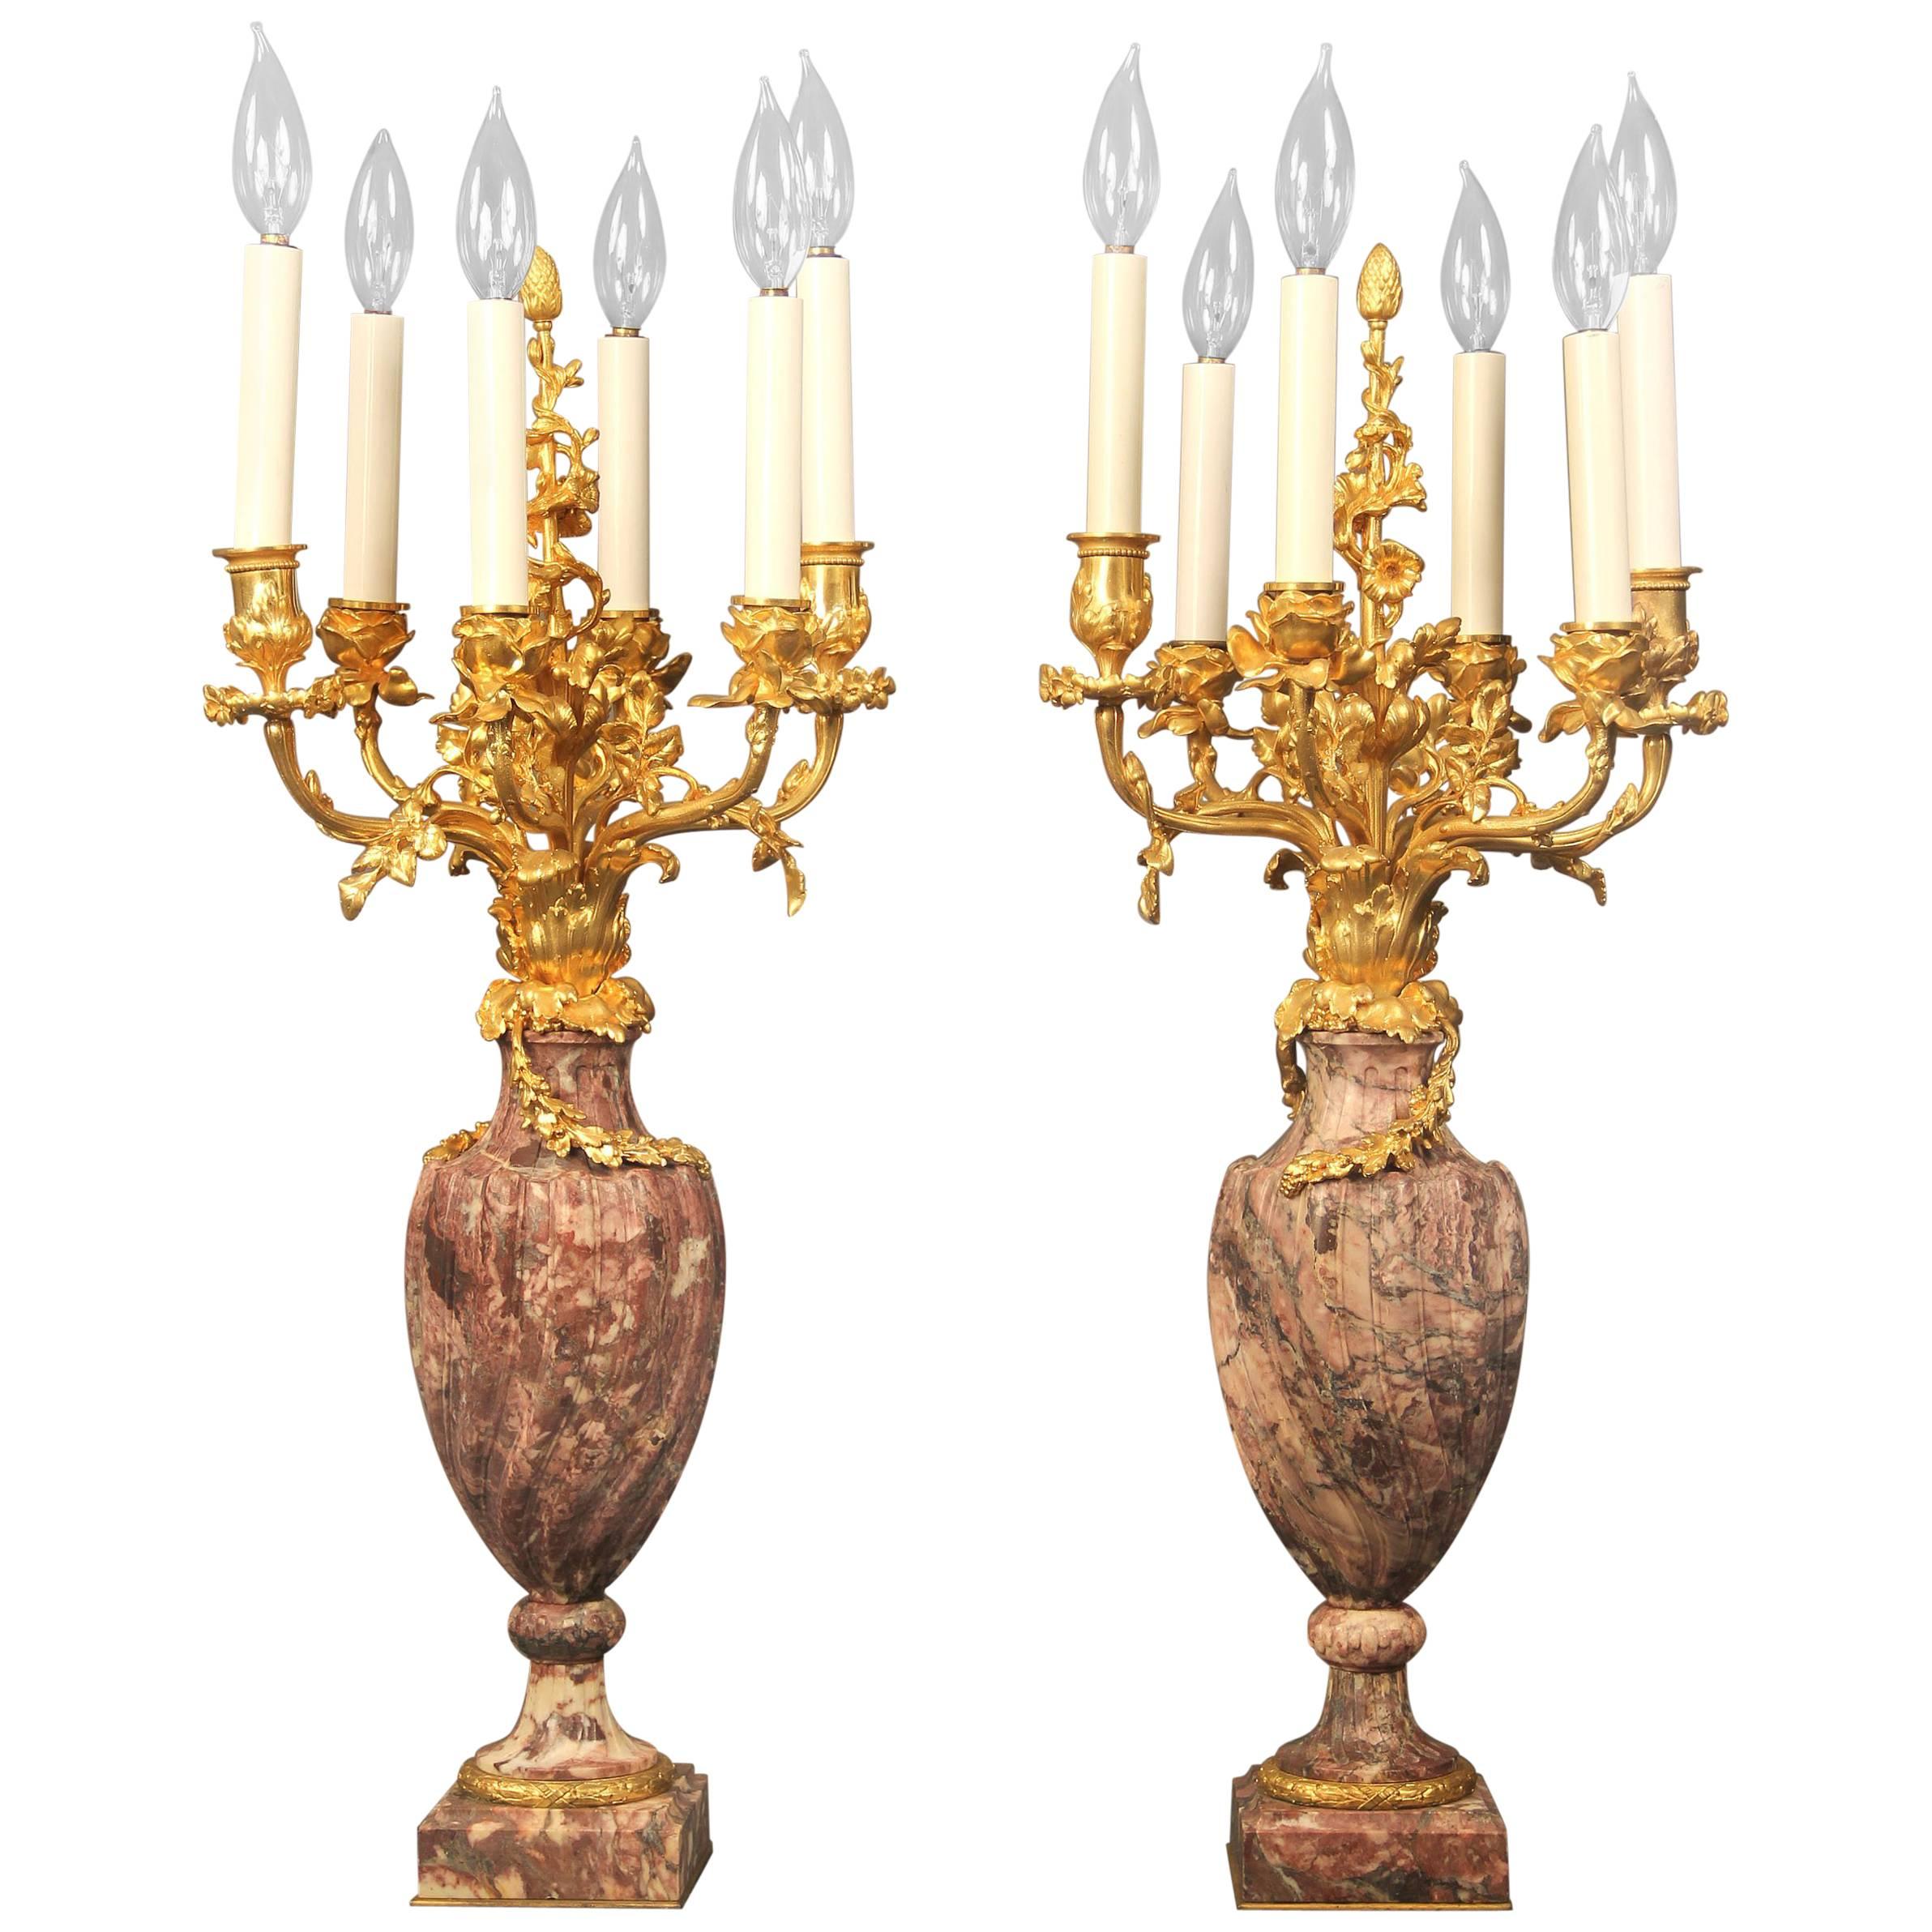 19th Century Régence Style Gilt Bronze and Marble Candelabra by Robert Freres